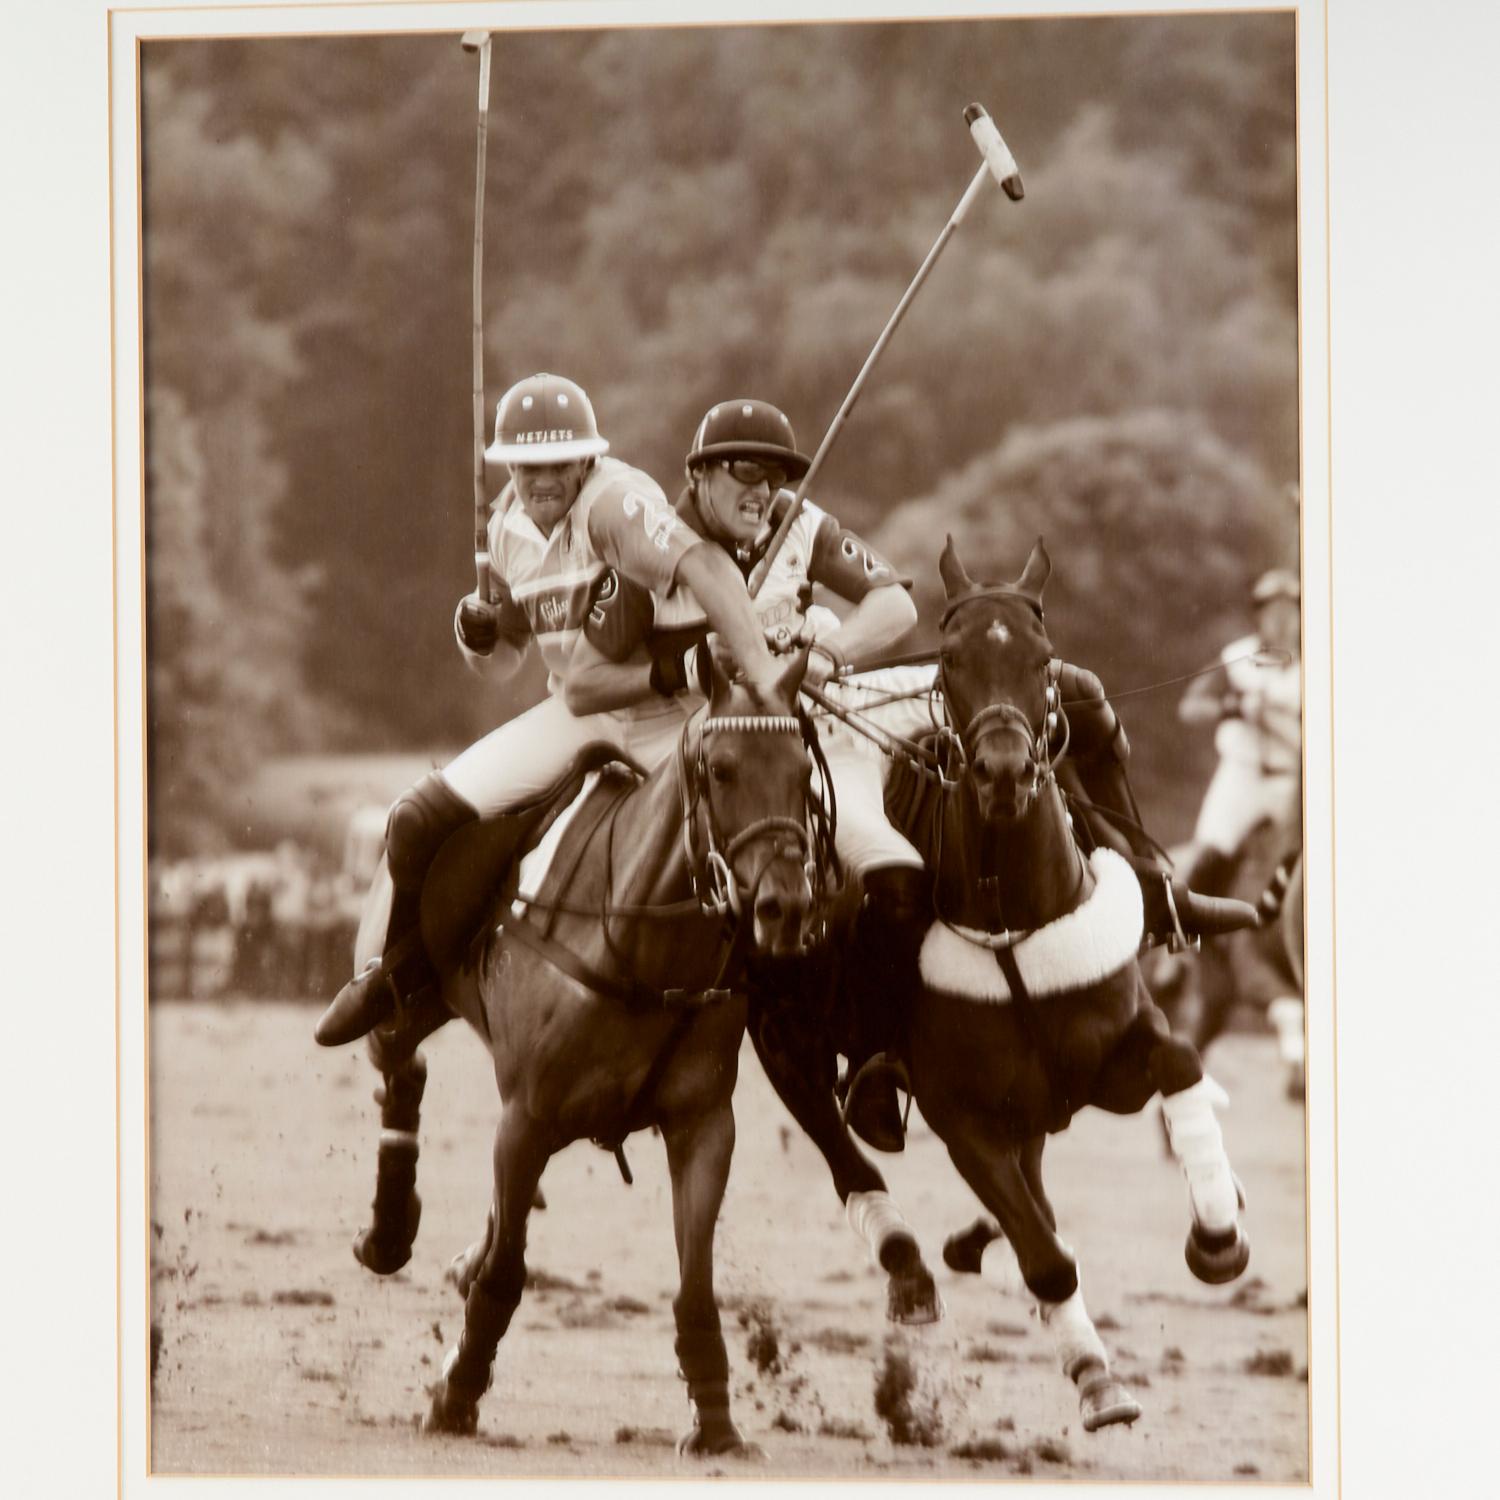 20th c., black and white photographic prints, matted and framed under glass. A pair of polo action shots that capture the intensity of play and the agility of player and polo pony alike.

Dimensions:
20.25